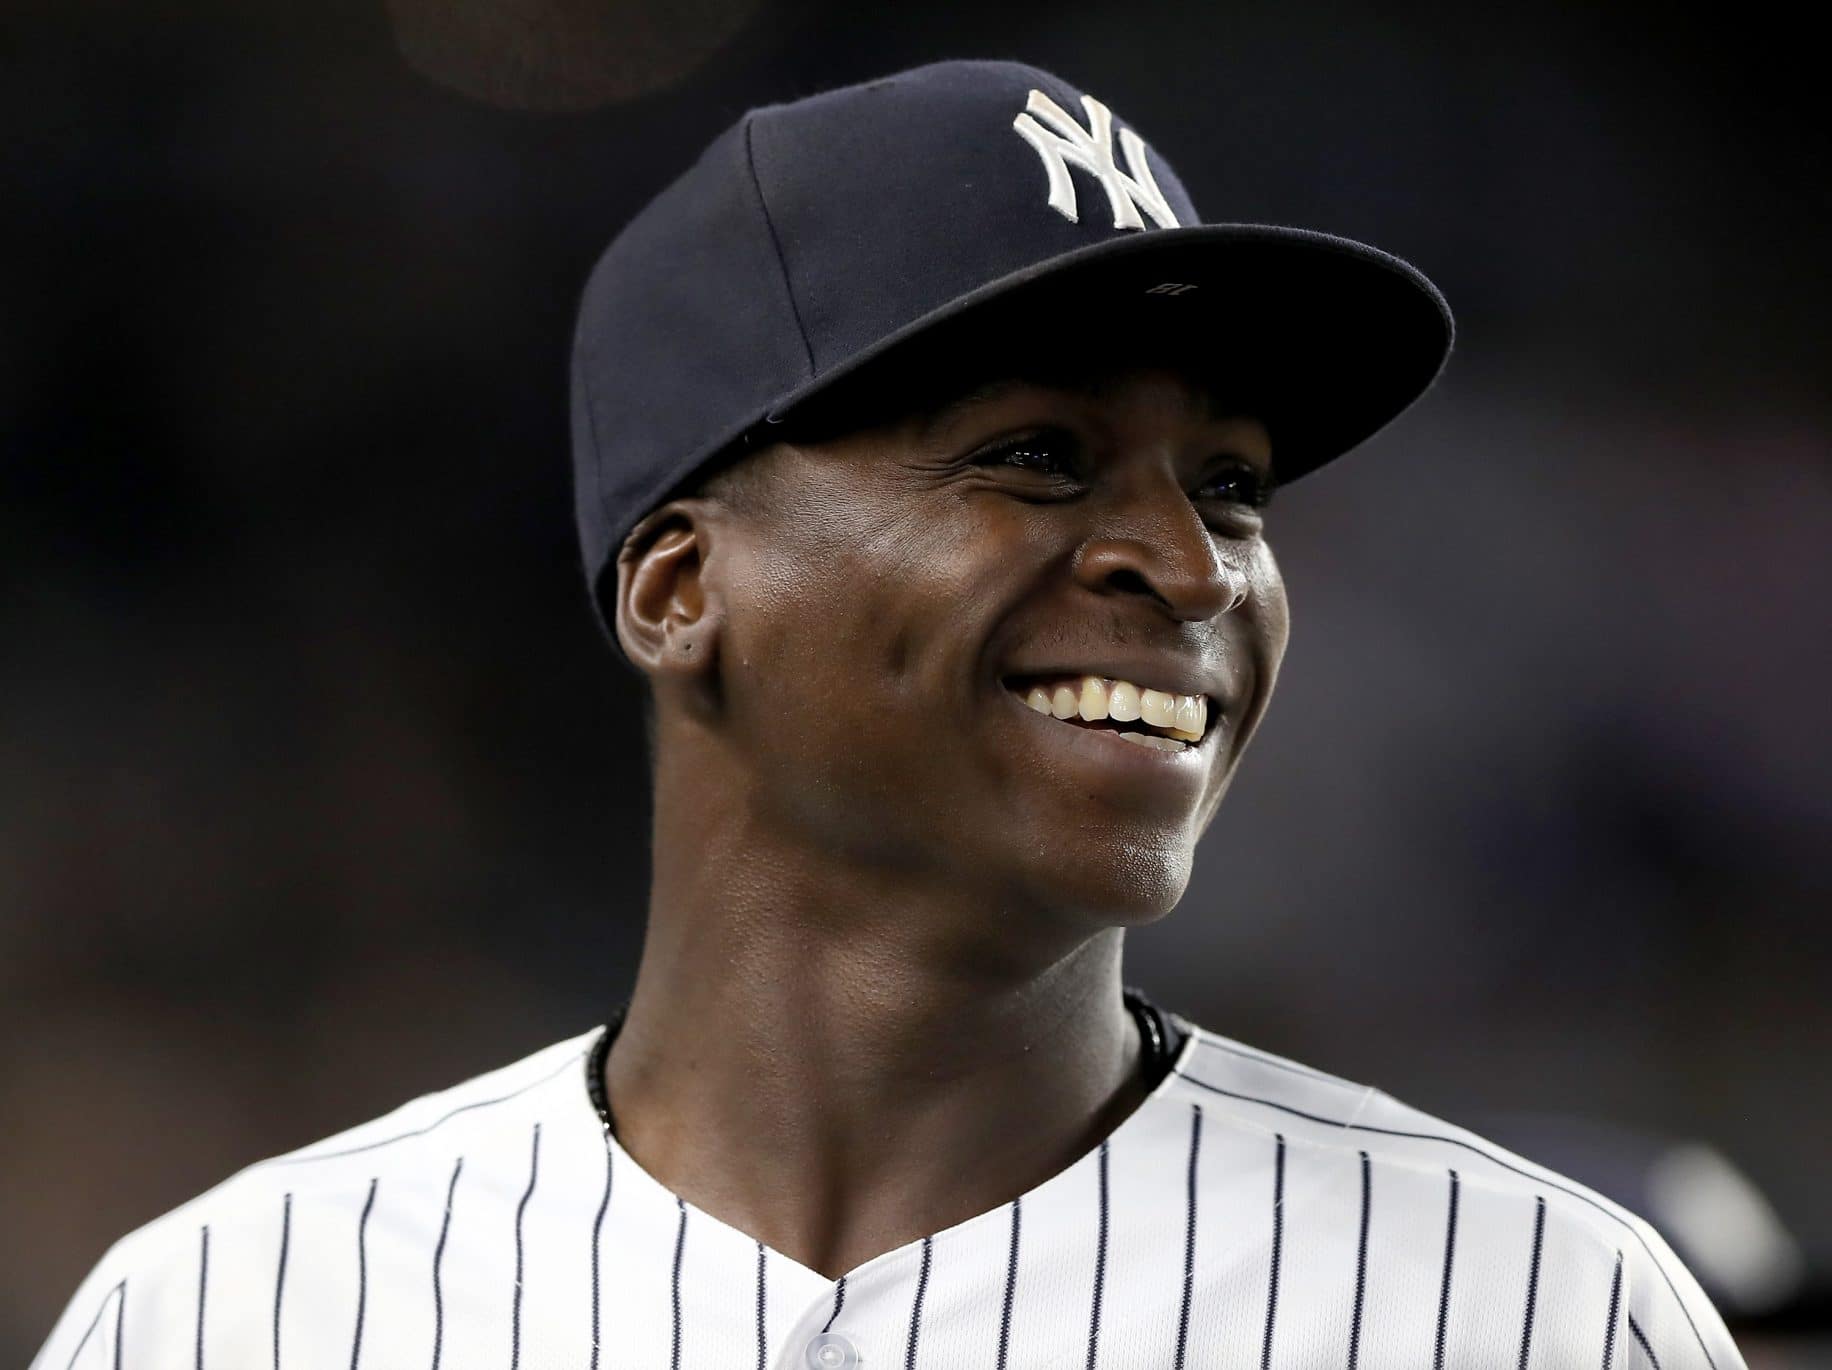 Is Didi Gregorius poised to become the Yankees next Derek Jeter?